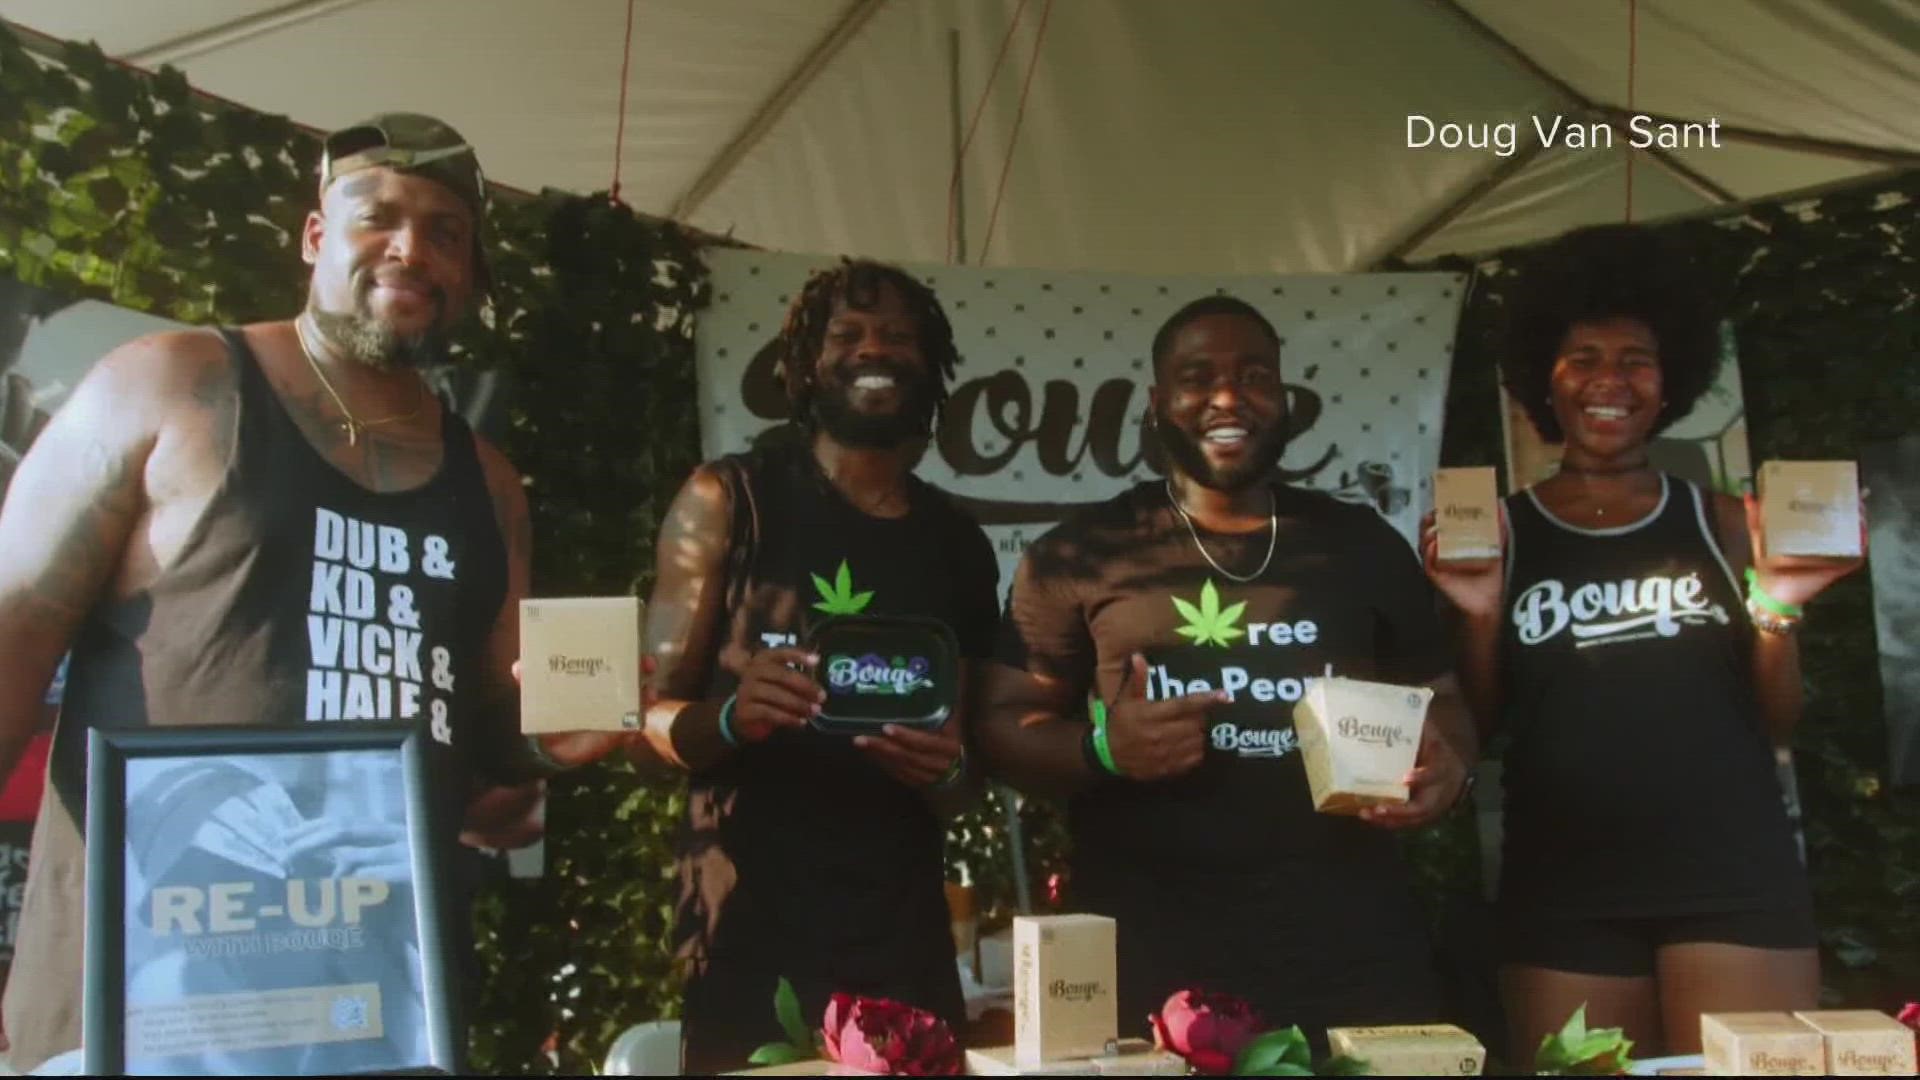 WUSA9 got a preview of the National Cannabis Festival coming to the RFK Festival Grounds on April 23. Wiz Khalifa will perform. https://nationalcannabisfestival.com/